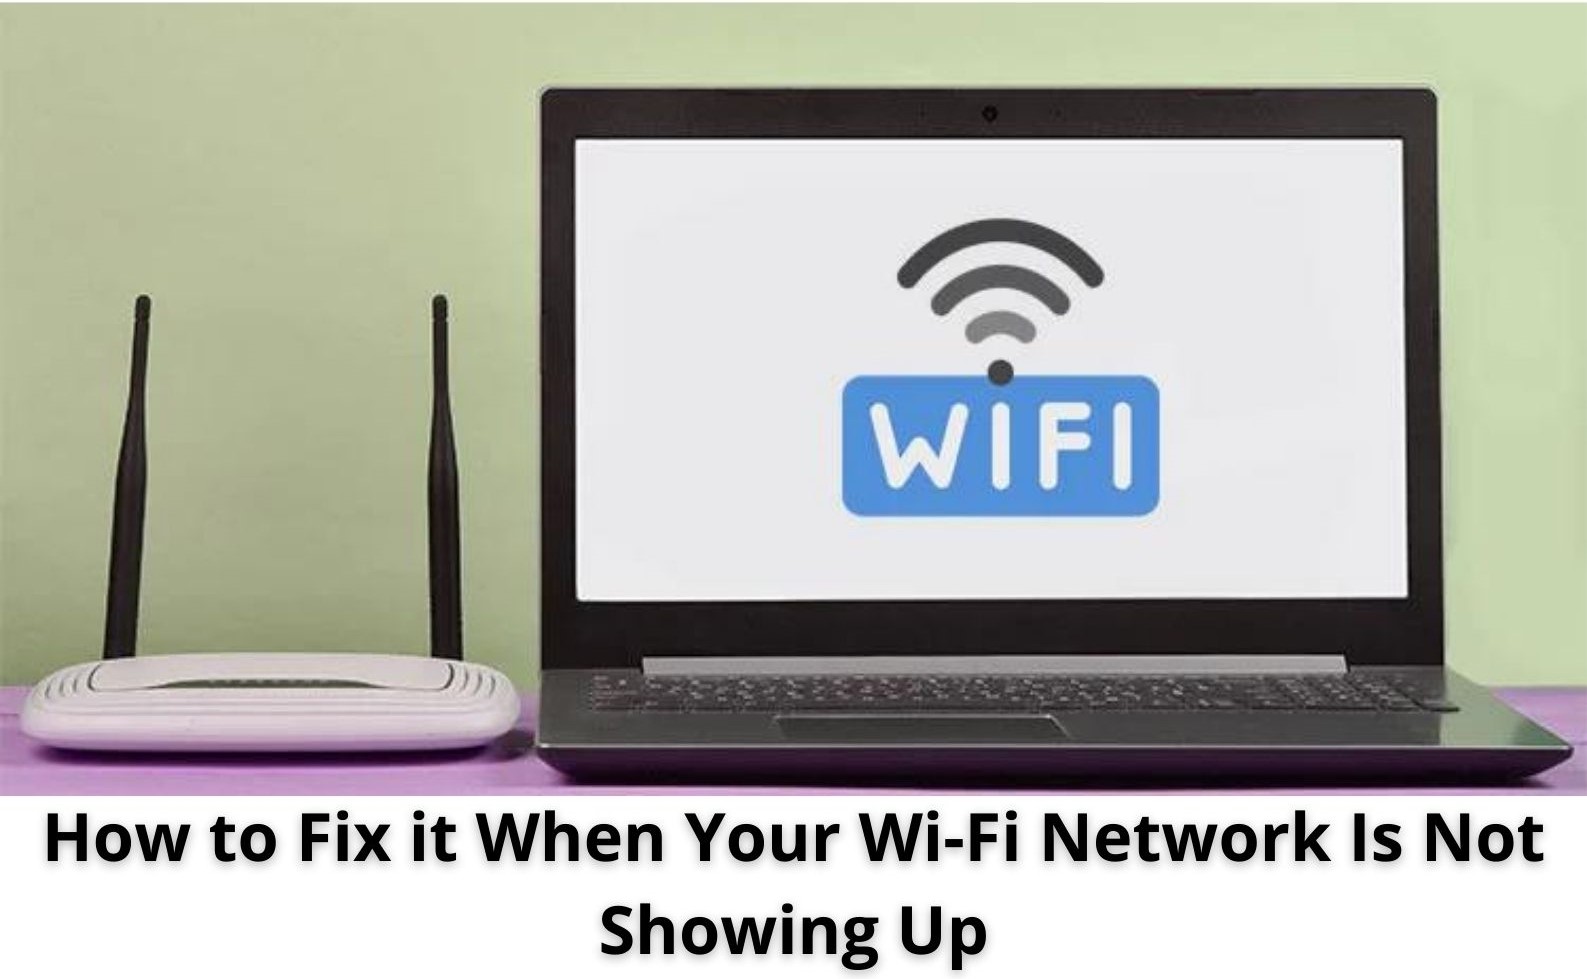 How to Fix it When Your Wi-Fi Network Is Not Showing Up